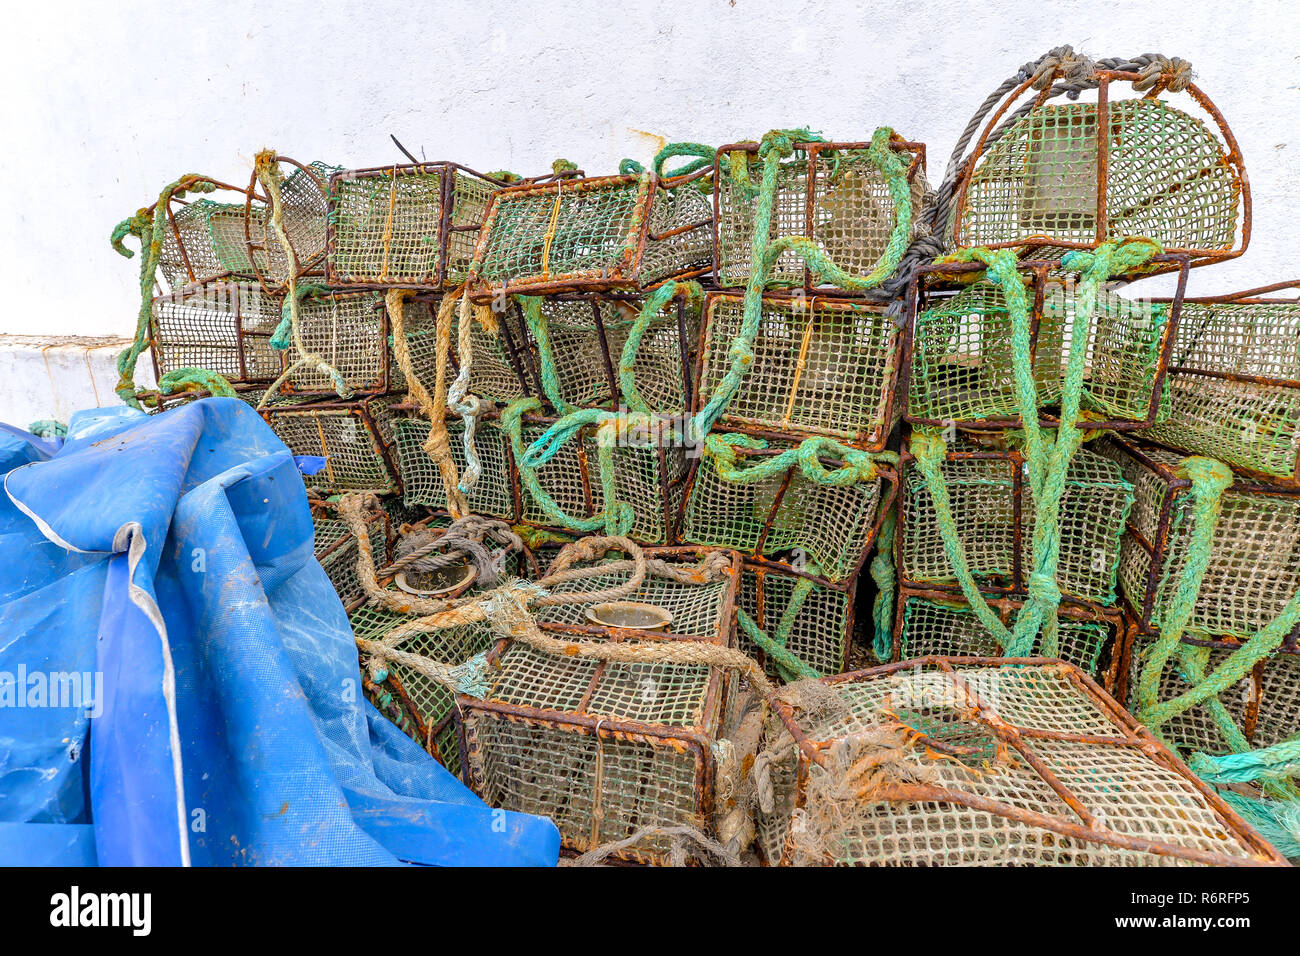 https://c8.alamy.com/comp/R6RFP5/vigogalicia-spain-112518-lobster-traps-and-ropes-on-the-pier-in-canido-R6RFP5.jpg